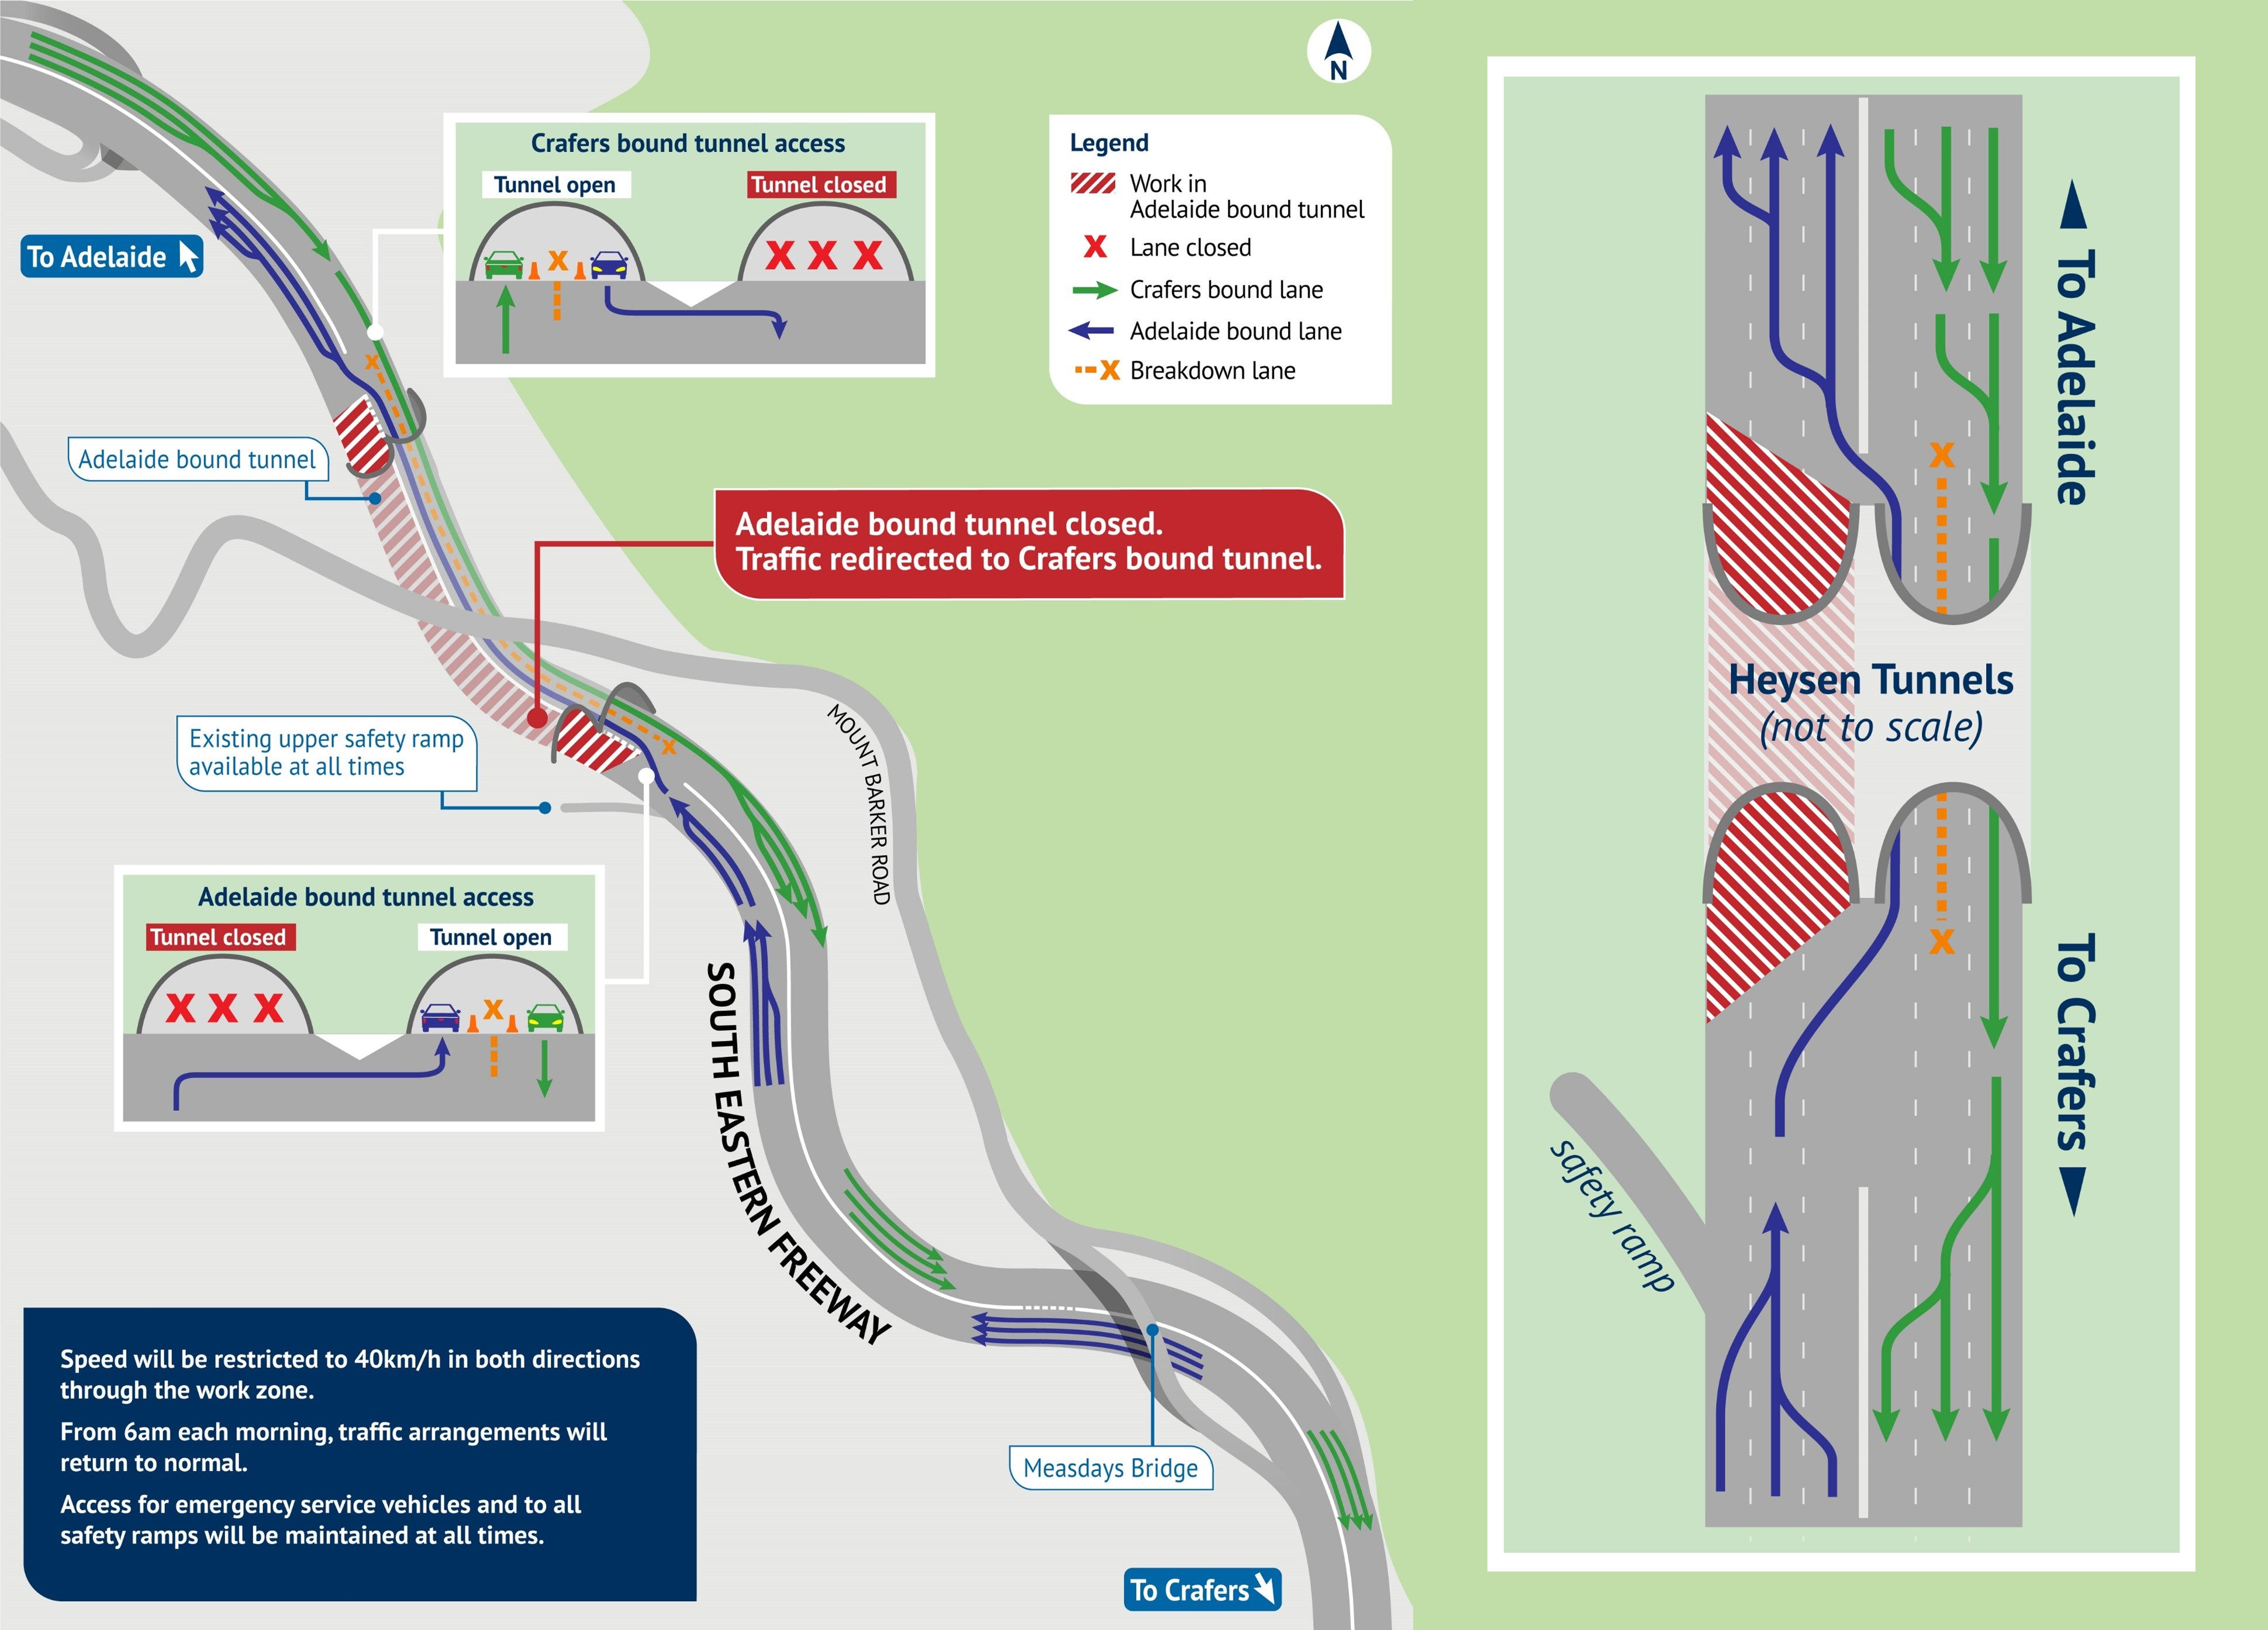 A map showing the traffic configuration during the Heysen Tunnels works.